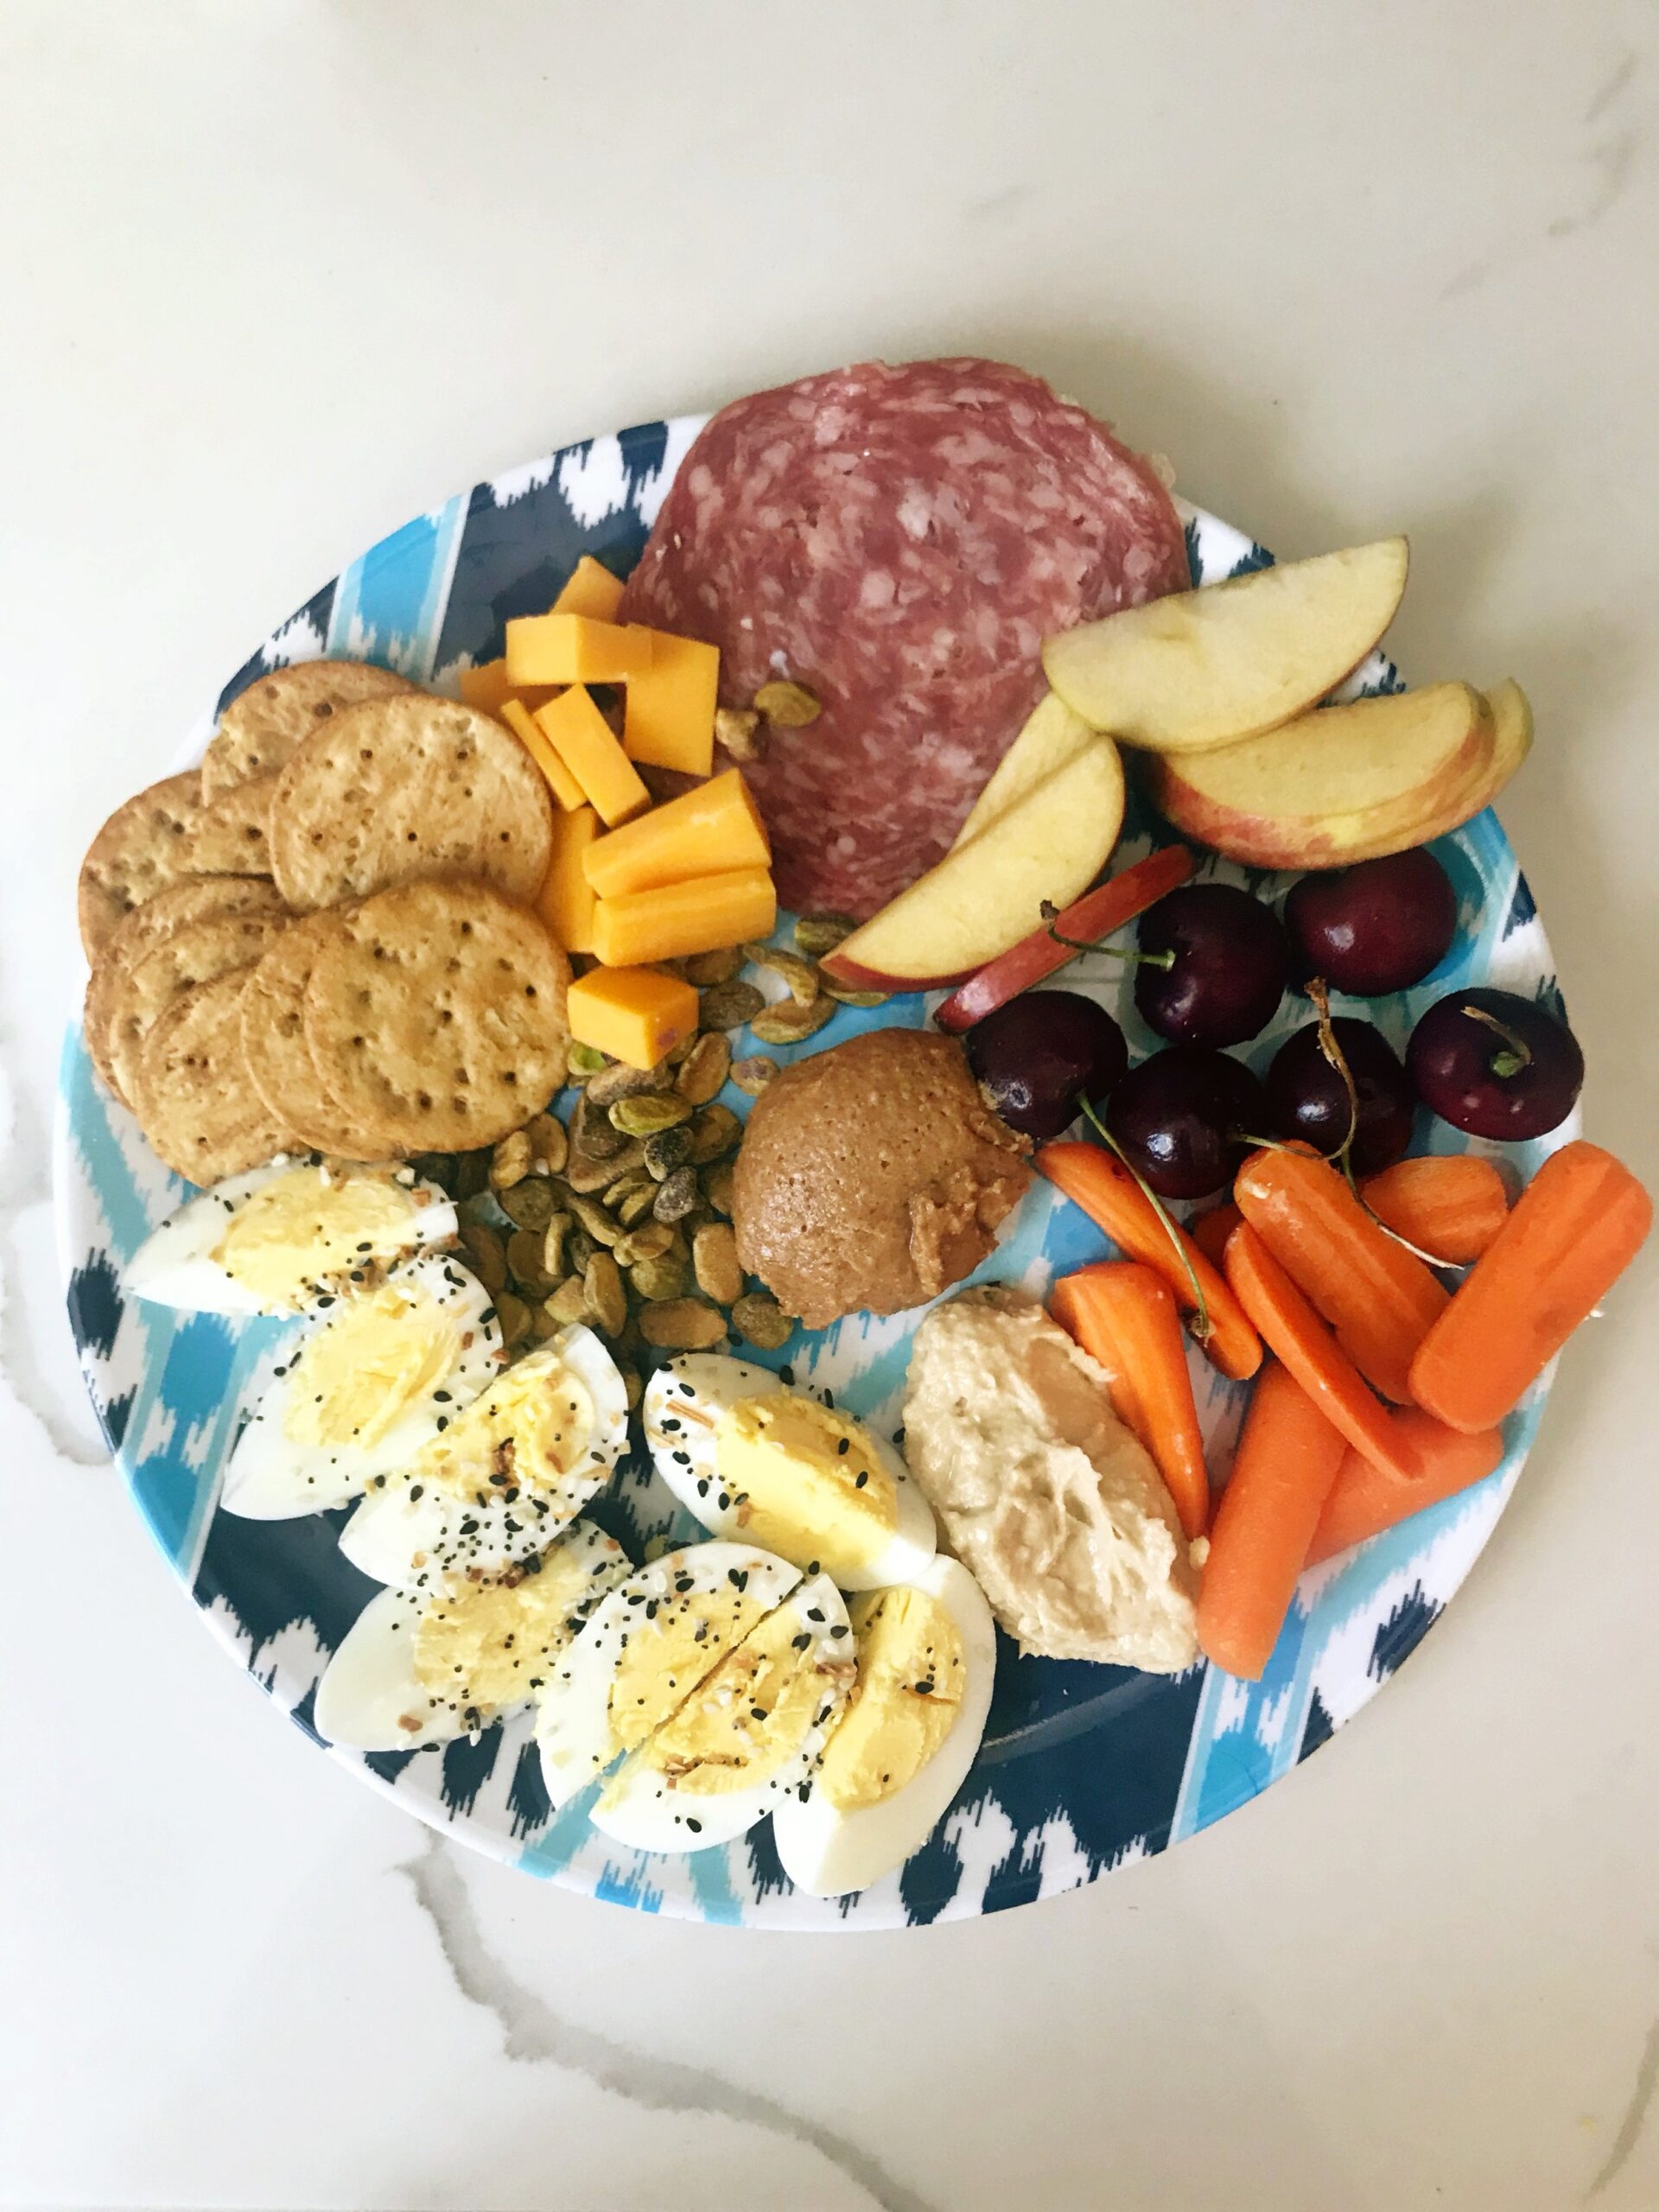 This is a typical lunch plate for me. My kids eat most of these things too so its nice to not have to make two different lunches for myself and them. &nbsp;